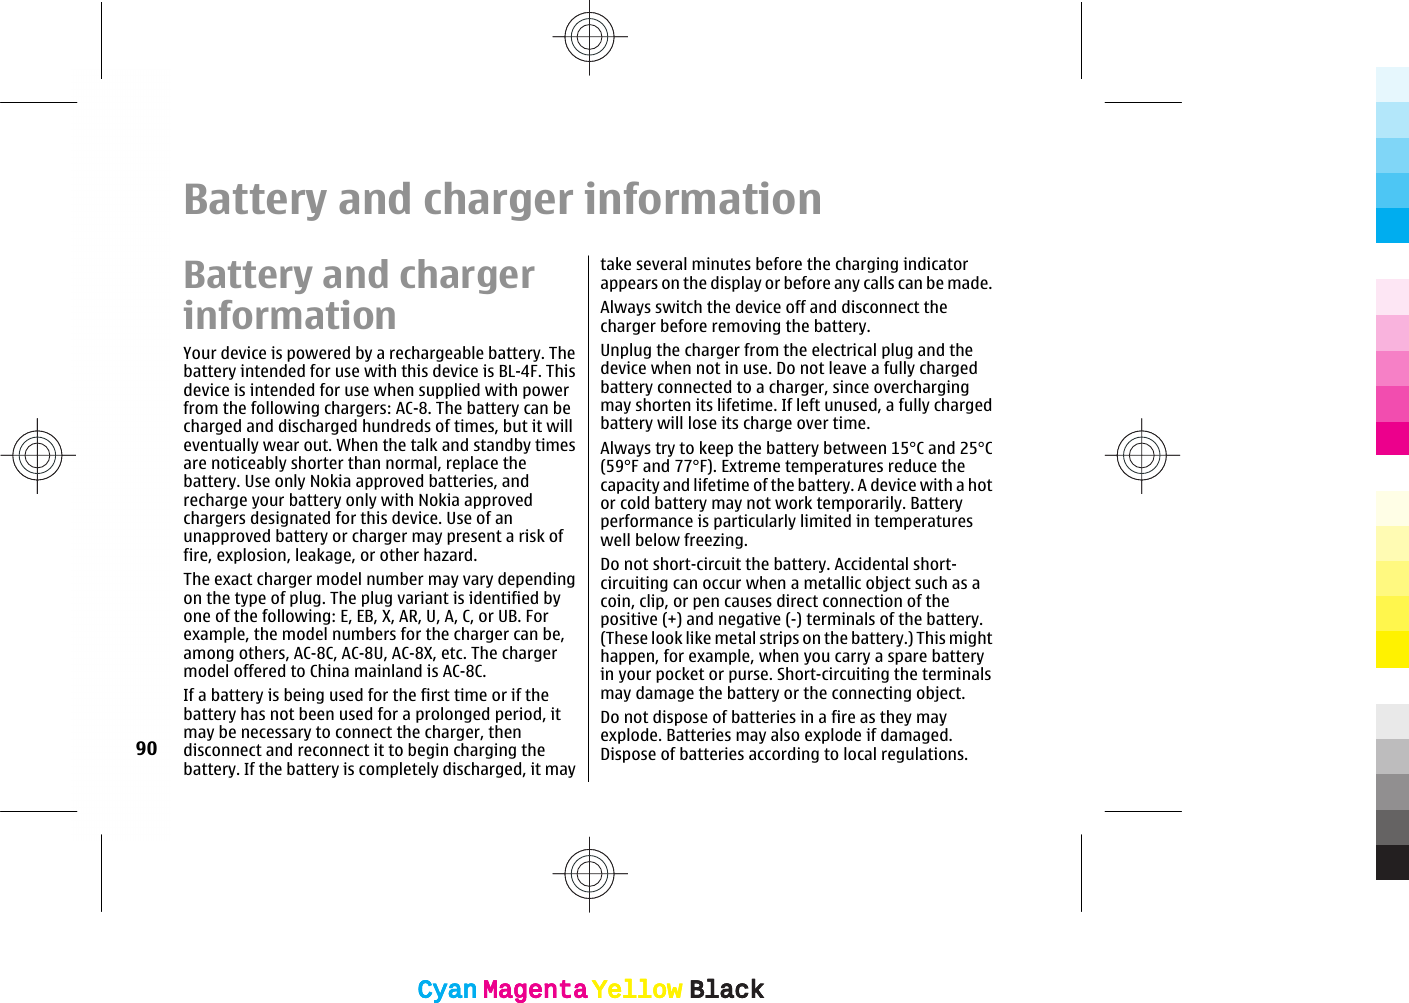 Battery and charger informationBattery and chargerinformationYour device is powered by a rechargeable battery. Thebattery intended for use with this device is BL-4F. Thisdevice is intended for use when supplied with powerfrom the following chargers: AC-8. The battery can becharged and discharged hundreds of times, but it willeventually wear out. When the talk and standby timesare noticeably shorter than normal, replace thebattery. Use only Nokia approved batteries, andrecharge your battery only with Nokia approvedchargers designated for this device. Use of anunapproved battery or charger may present a risk offire, explosion, leakage, or other hazard.The exact charger model number may vary dependingon the type of plug. The plug variant is identified byone of the following: E, EB, X, AR, U, A, C, or UB. Forexample, the model numbers for the charger can be,among others, AC-8C, AC-8U, AC-8X, etc. The chargermodel offered to China mainland is AC-8C.If a battery is being used for the first time or if thebattery has not been used for a prolonged period, itmay be necessary to connect the charger, thendisconnect and reconnect it to begin charging thebattery. If the battery is completely discharged, it maytake several minutes before the charging indicatorappears on the display or before any calls can be made.Always switch the device off and disconnect thecharger before removing the battery.Unplug the charger from the electrical plug and thedevice when not in use. Do not leave a fully chargedbattery connected to a charger, since overchargingmay shorten its lifetime. If left unused, a fully chargedbattery will lose its charge over time.Always try to keep the battery between 15°C and 25°C(59°F and 77°F). Extreme temperatures reduce thecapacity and lifetime of the battery. A device with a hotor cold battery may not work temporarily. Batteryperformance is particularly limited in temperatureswell below freezing.Do not short-circuit the battery. Accidental short-circuiting can occur when a metallic object such as acoin, clip, or pen causes direct connection of thepositive (+) and negative (-) terminals of the battery.(These look like metal strips on the battery.) This mighthappen, for example, when you carry a spare batteryin your pocket or purse. Short-circuiting the terminalsmay damage the battery or the connecting object.Do not dispose of batteries in a fire as they mayexplode. Batteries may also explode if damaged.Dispose of batteries according to local regulations.90CyanCyanMagentaMagentaYellowYellowBlackBlackCyanCyanMagentaMagentaYellowYellowBlackBlack